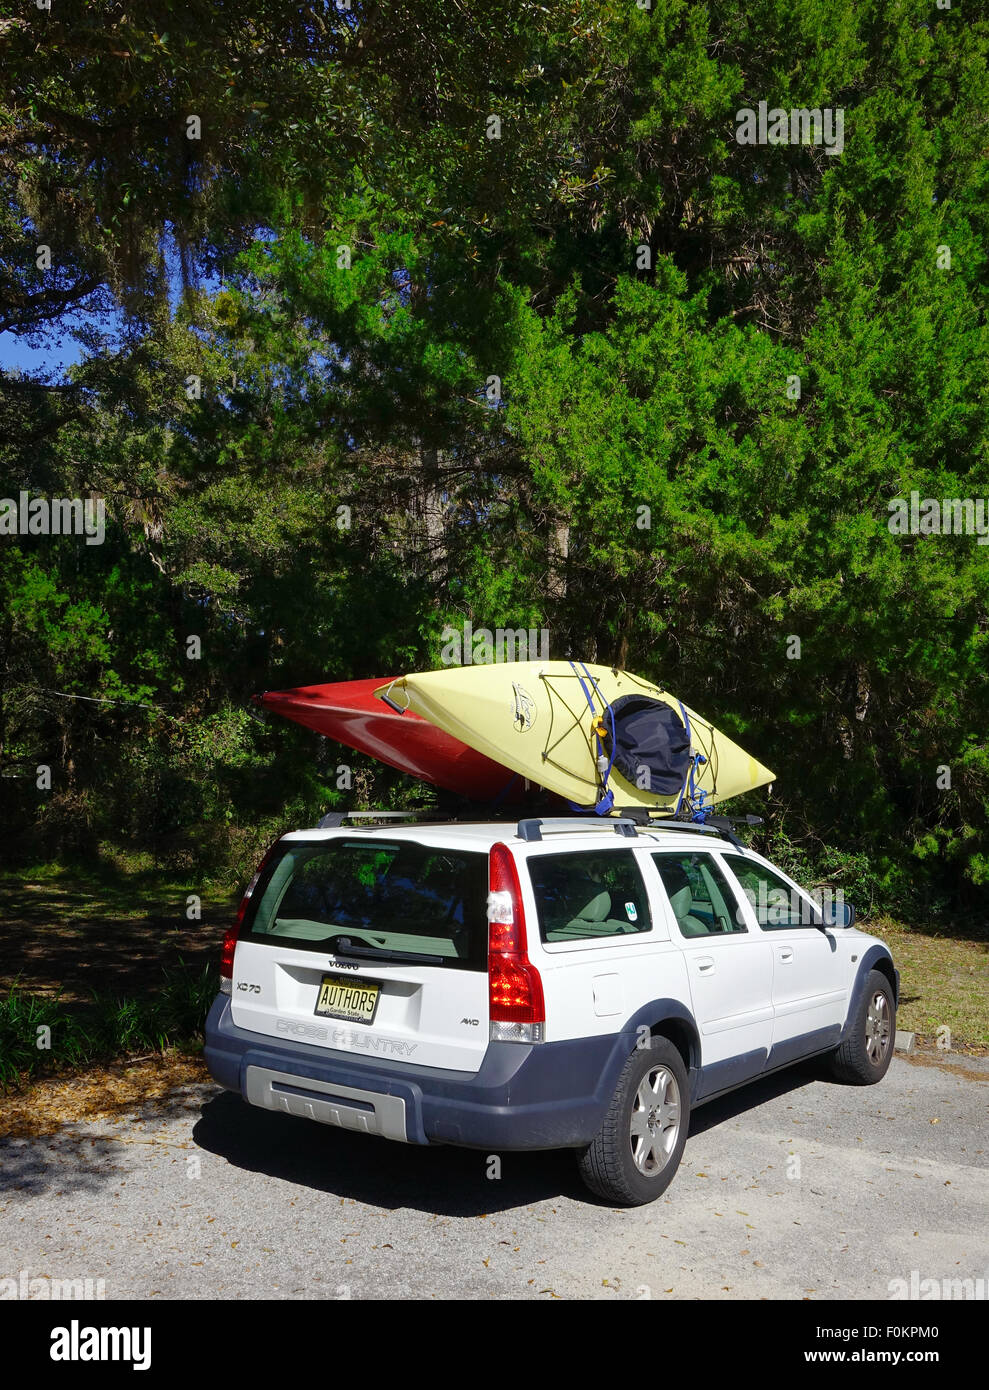 Automobile with 2 kayaks on roof Stock Photo - Alamy